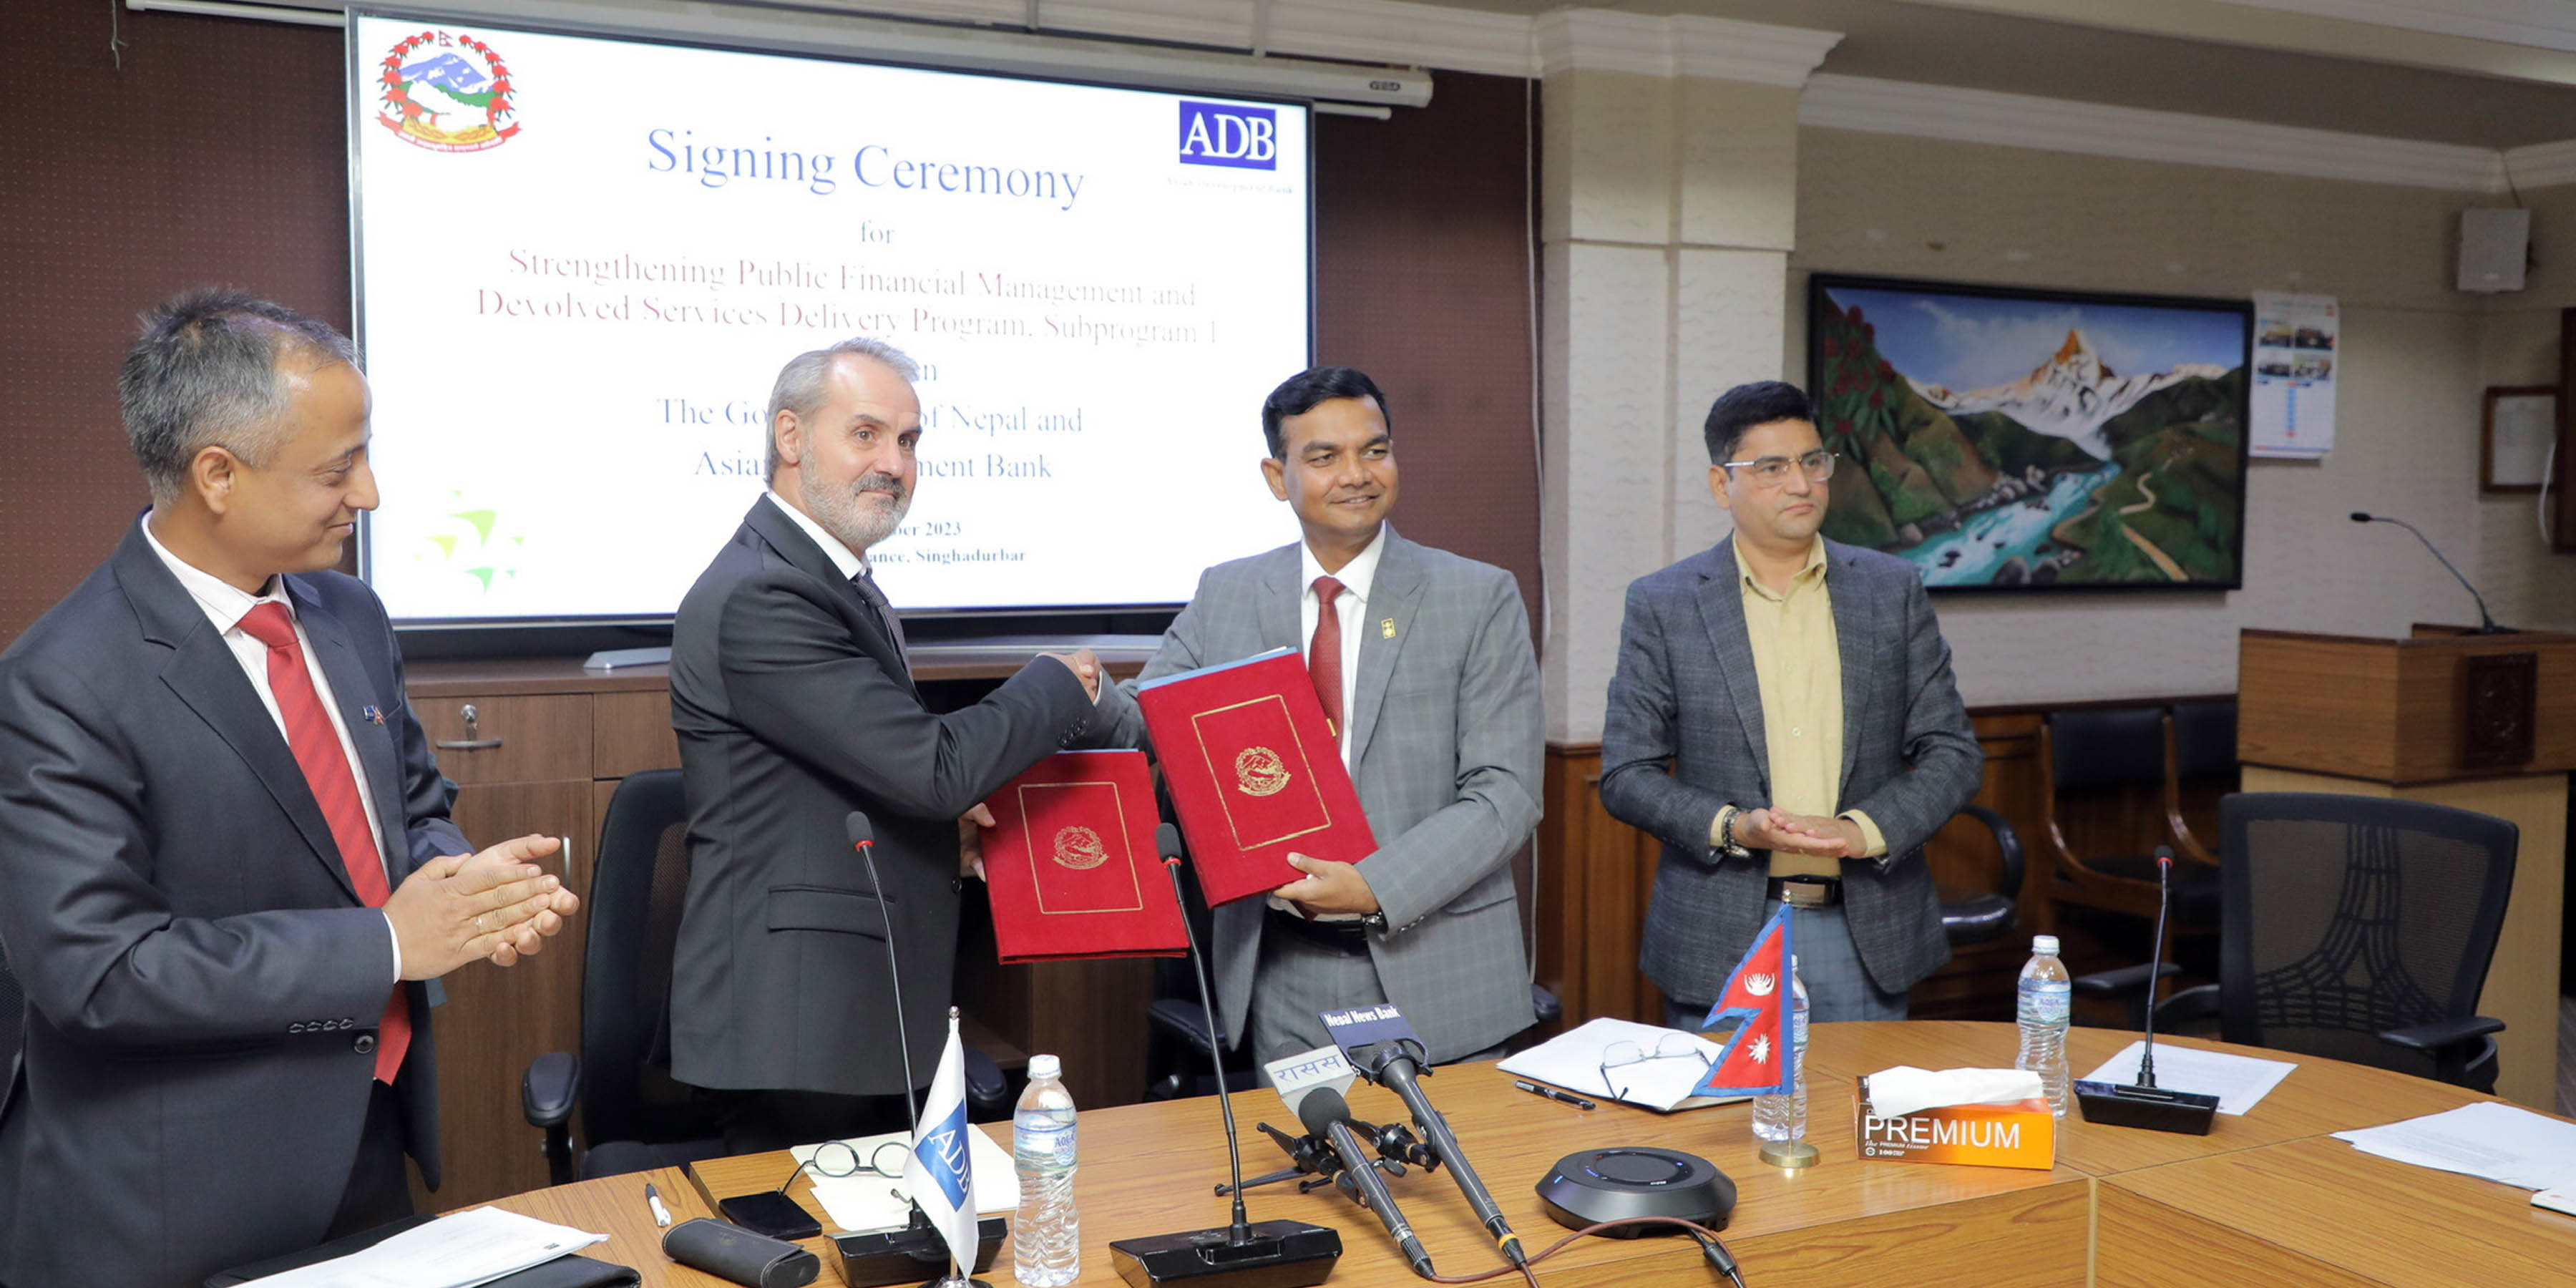 Govt signs agreement with ADB for $100 million concessional loan